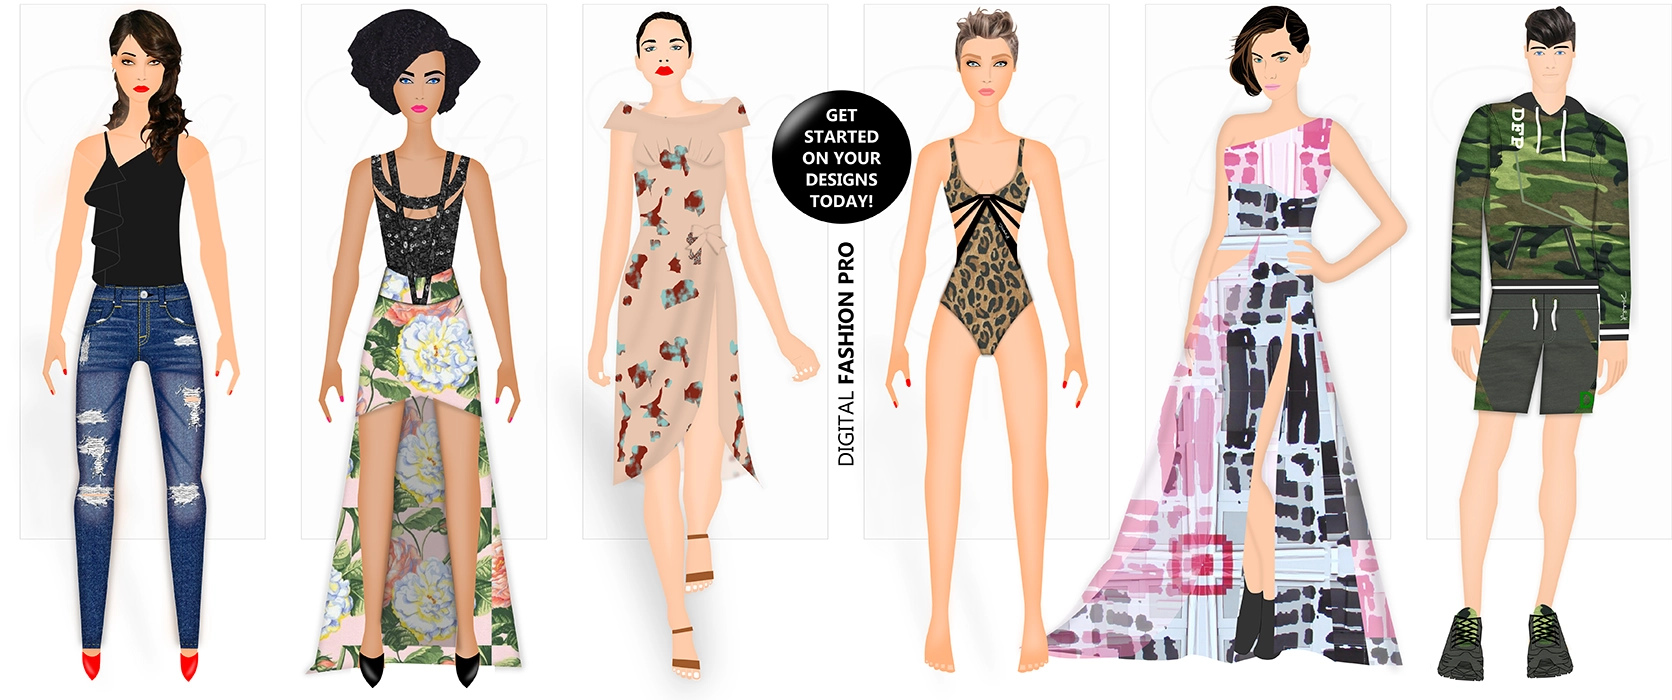 Digital Fashion Pro - Fashion Design Software - how to design your own clothing sketches